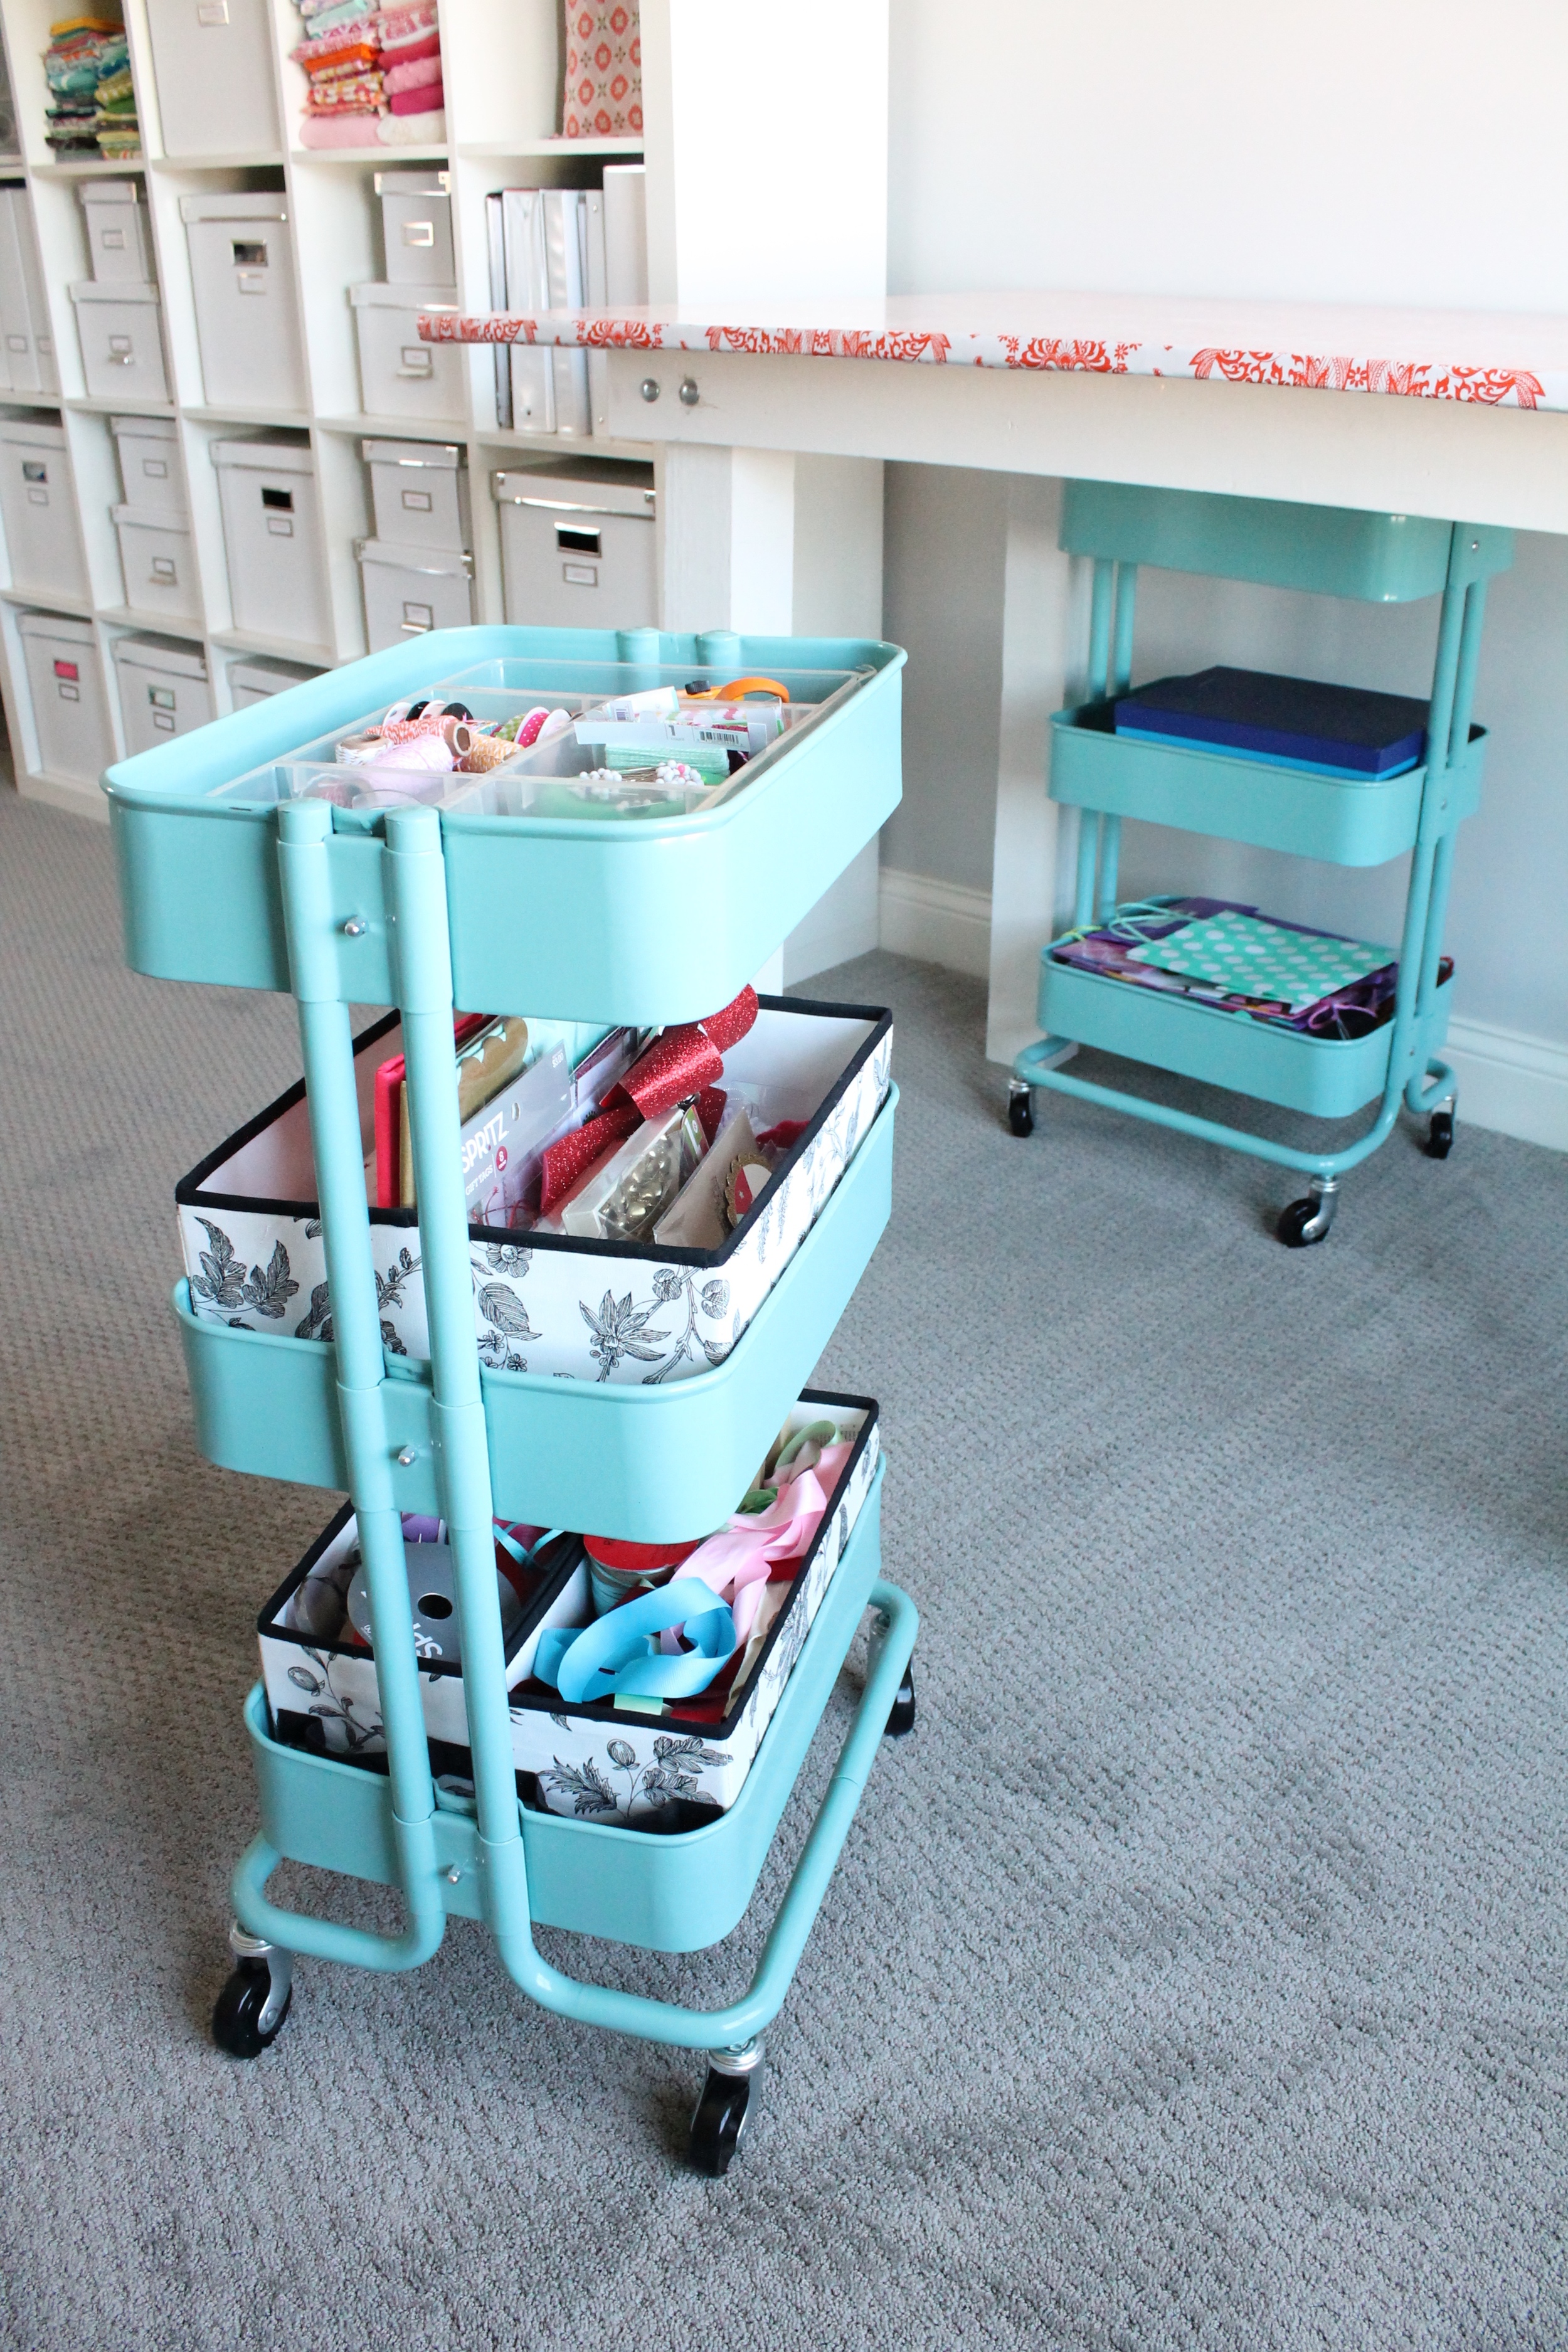 Aqua rolling carts from Ikea. Perfect place to organize supplies for the craft room.